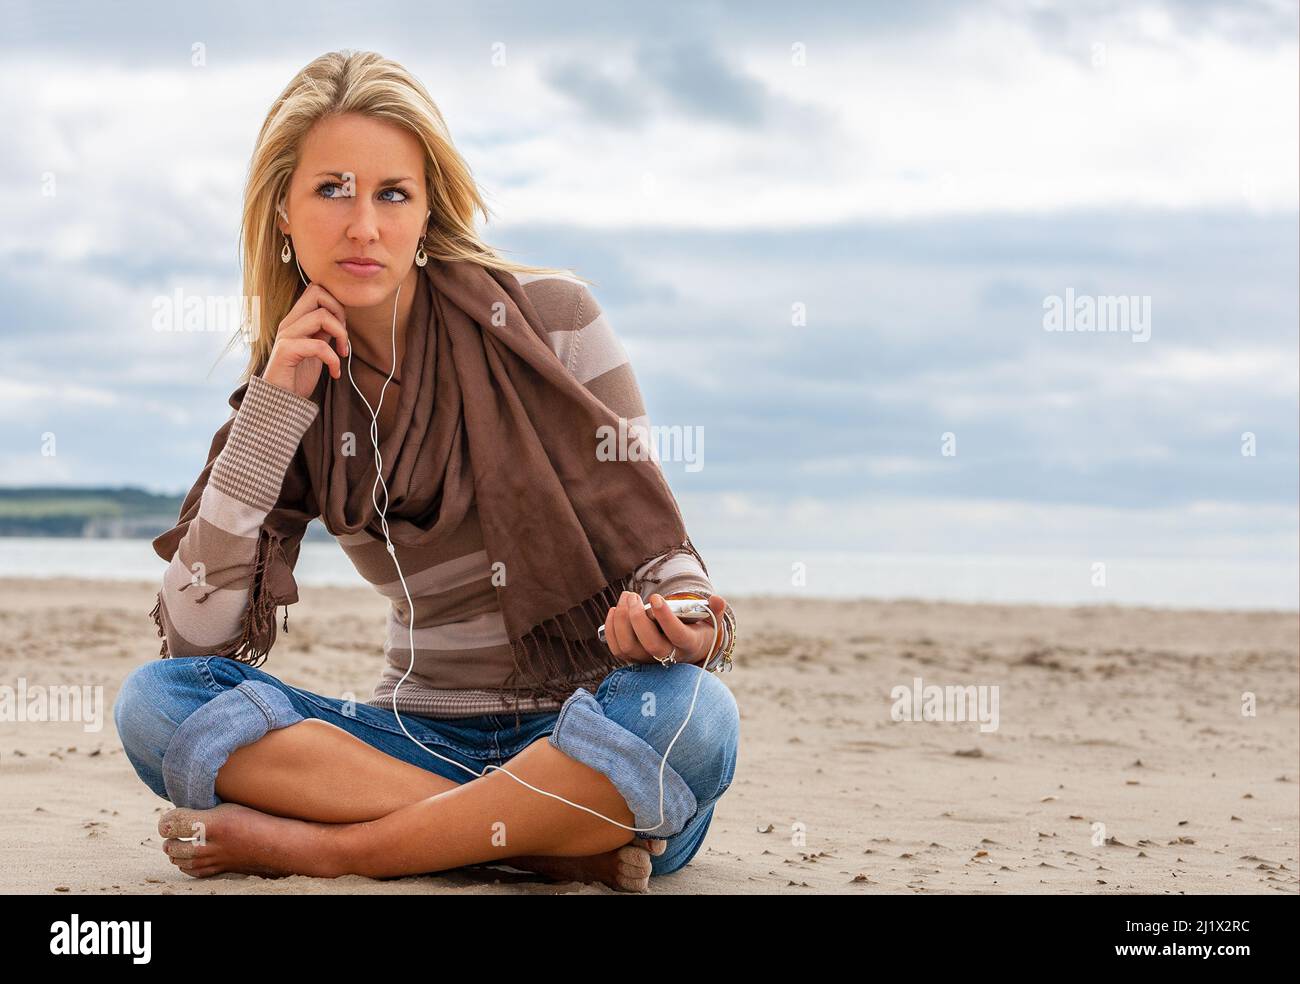 Beautiful thoughtful sads depressed young blond woman listening to music on a beach with her smartphone cell phone and headphones Stock Photo